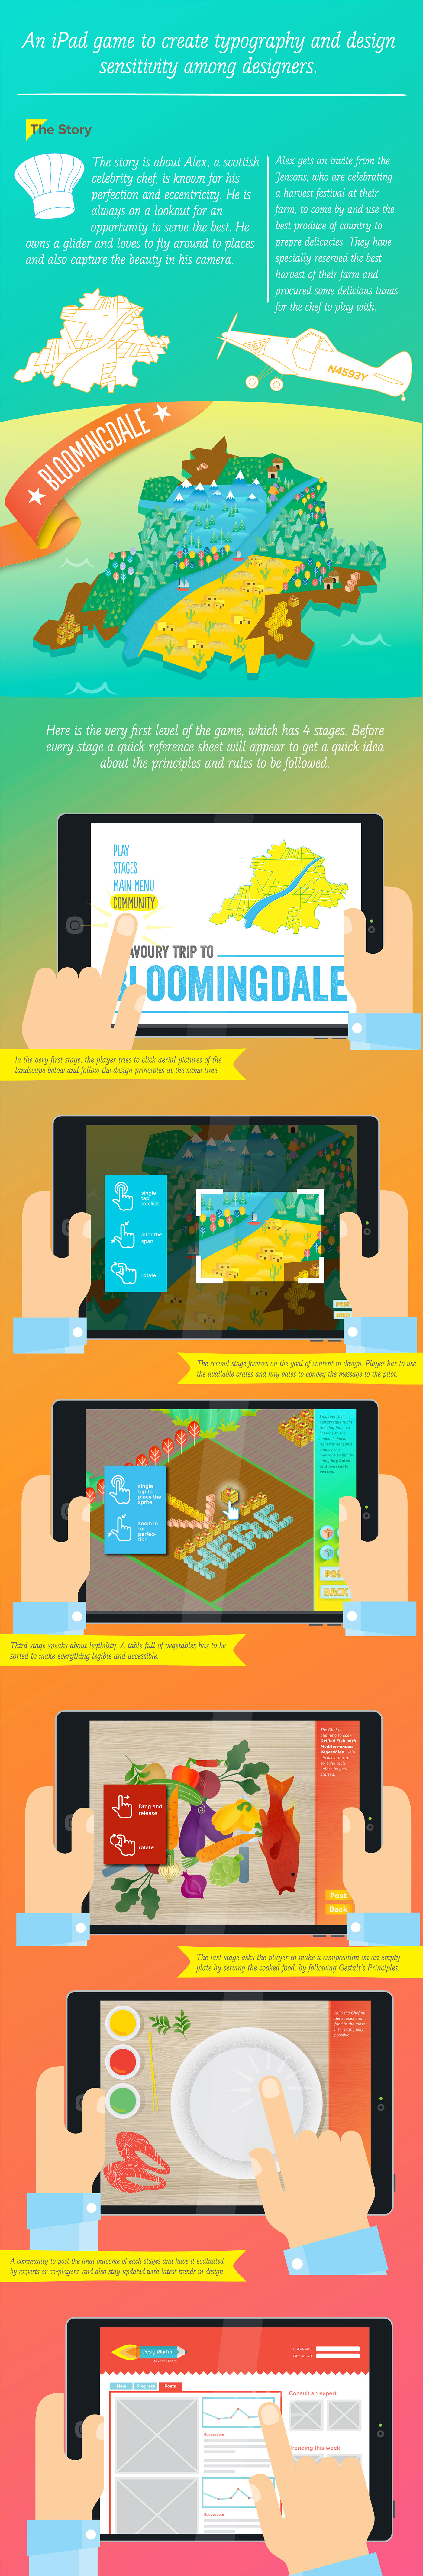 game Food  gourmet farming farms village map iPad Education play learning crates surfer design